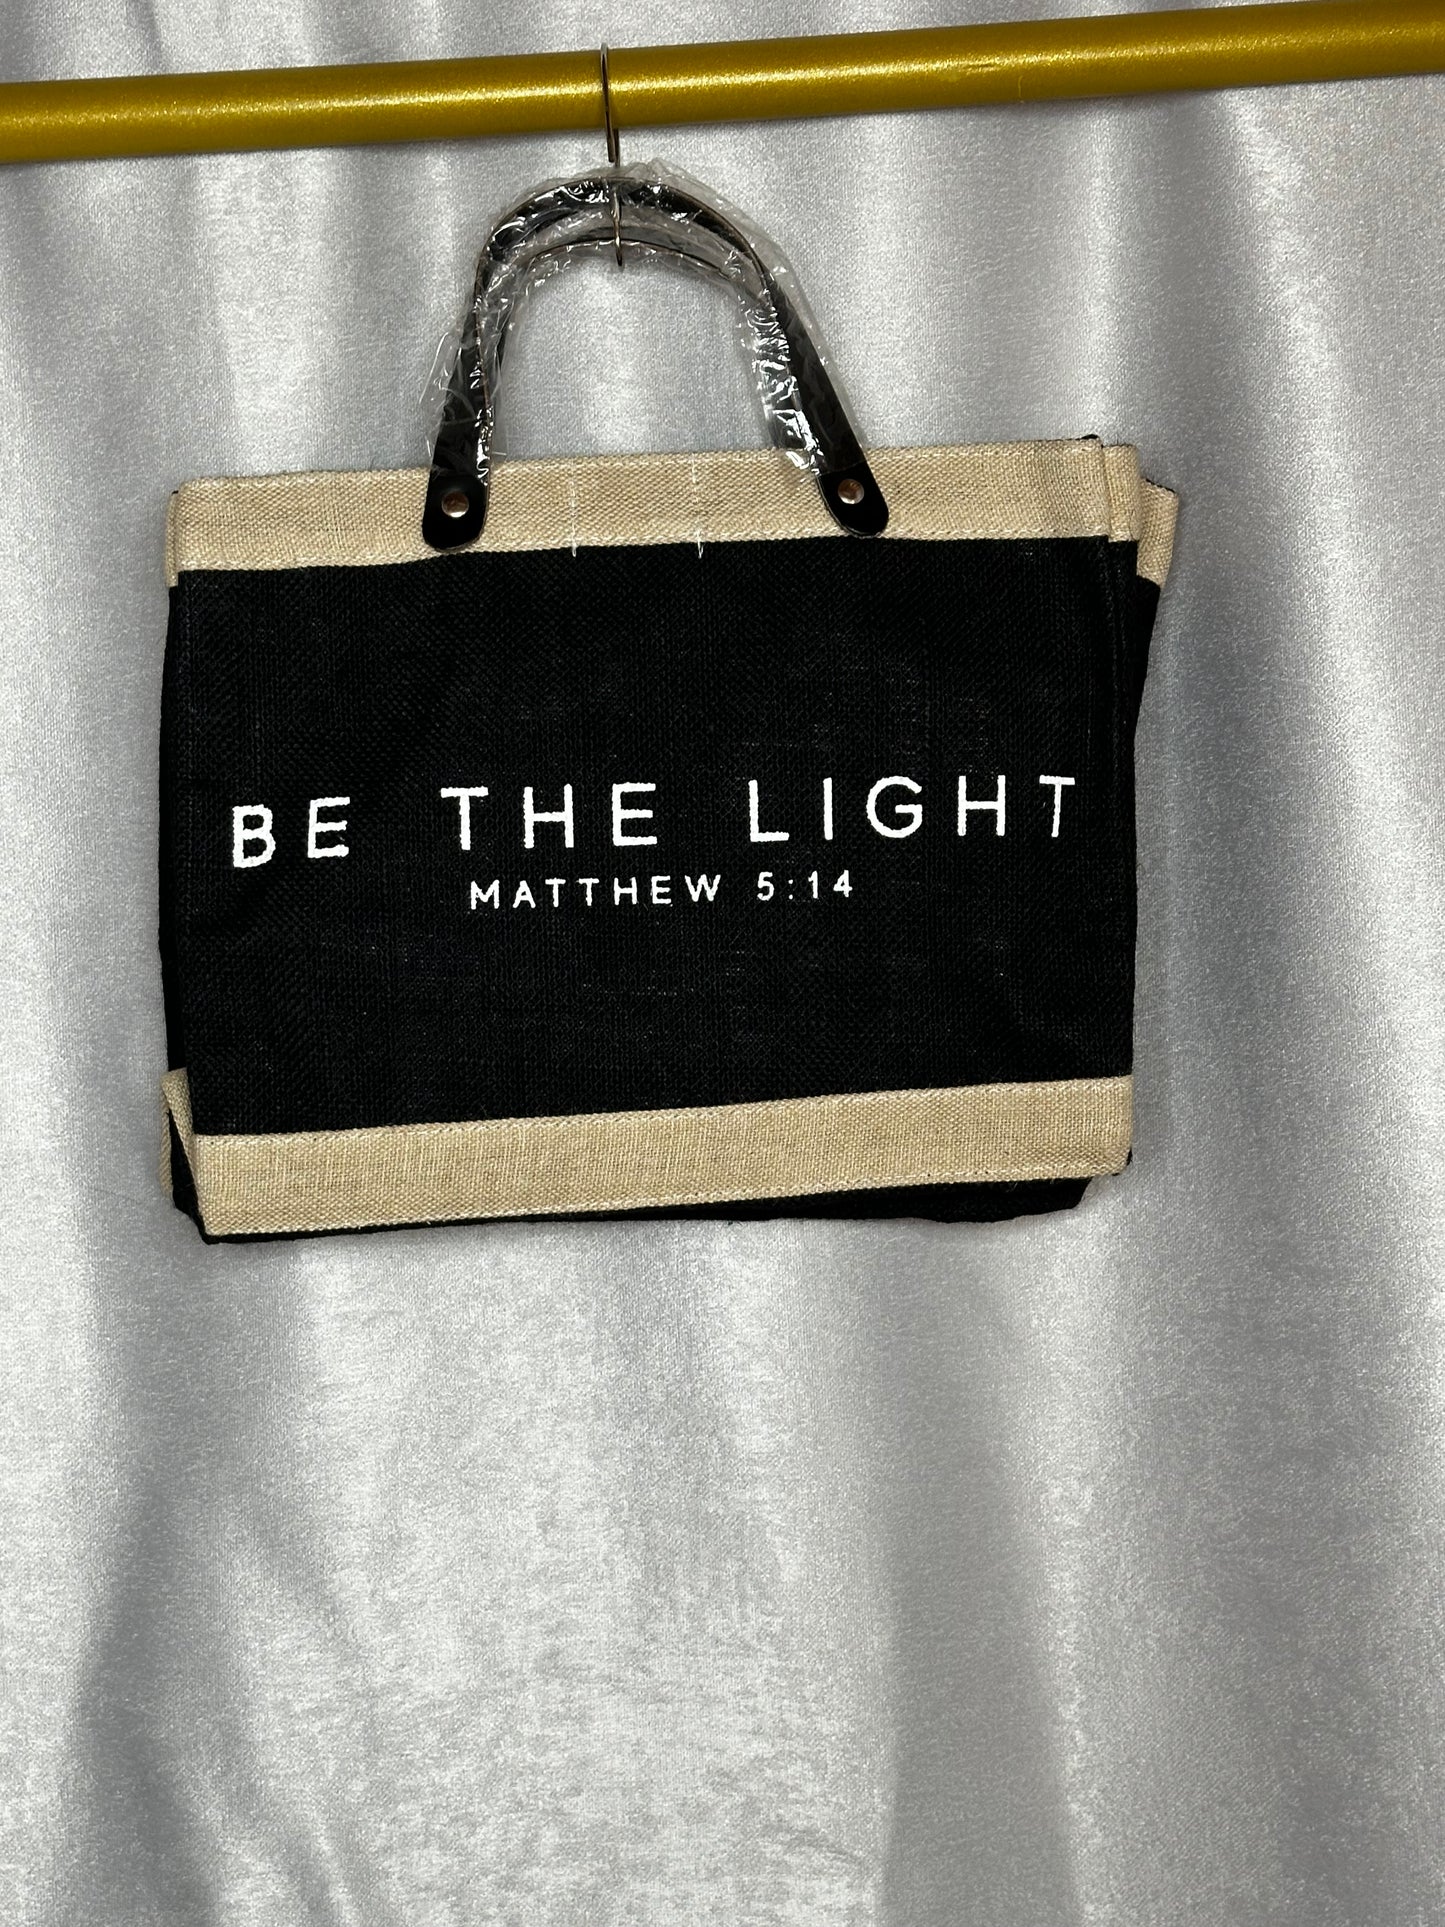 Be the light tote